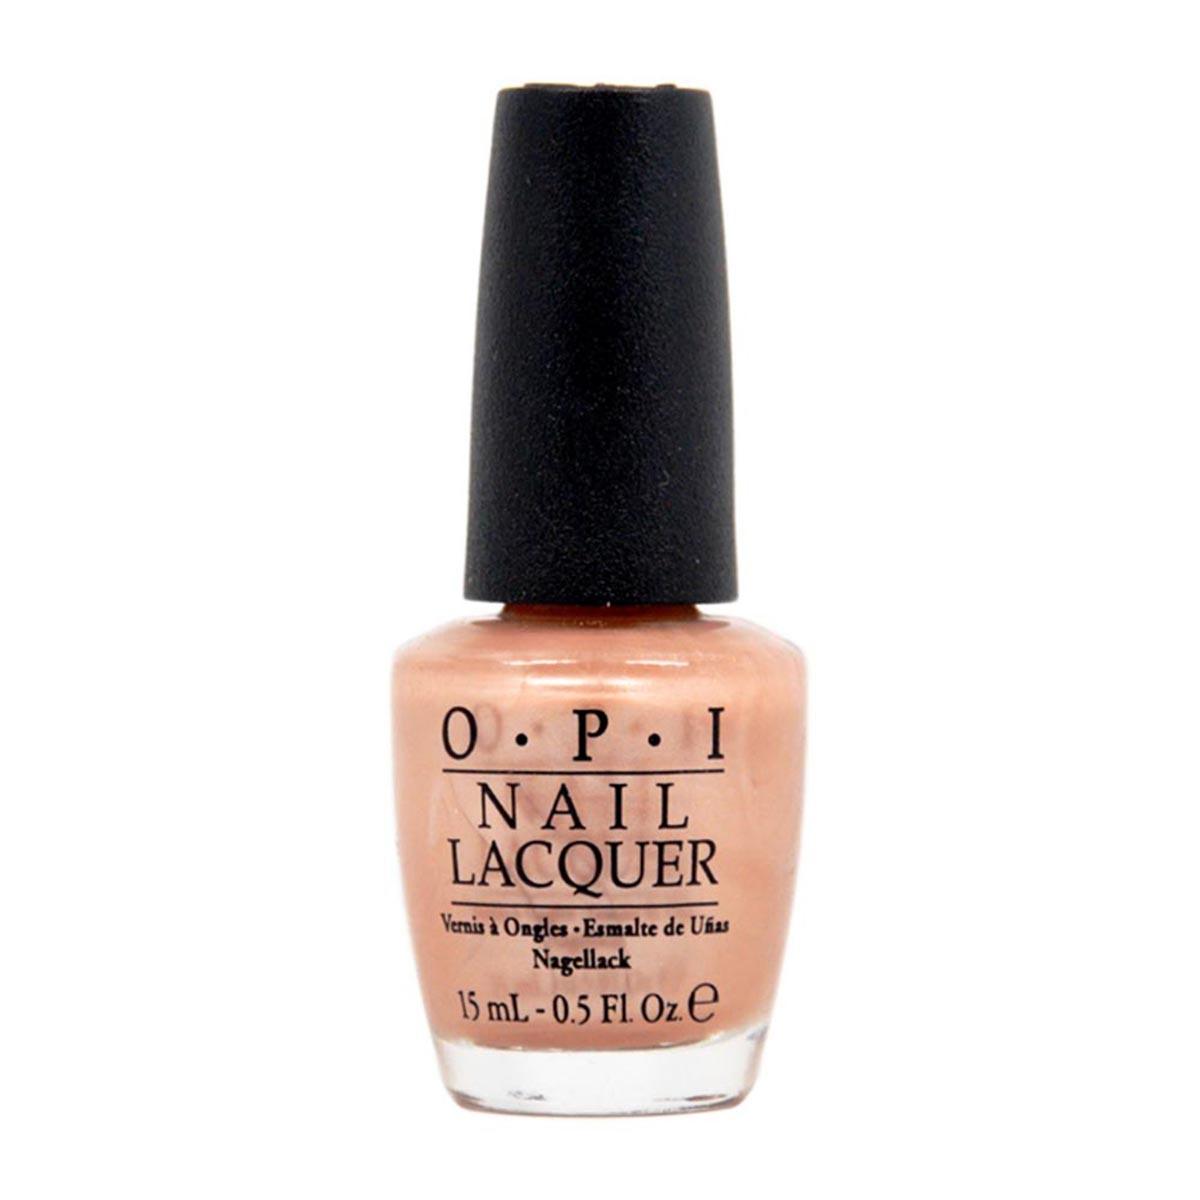 opi-nail-lacquer-nlr58-cosmonot-tonight-honey-